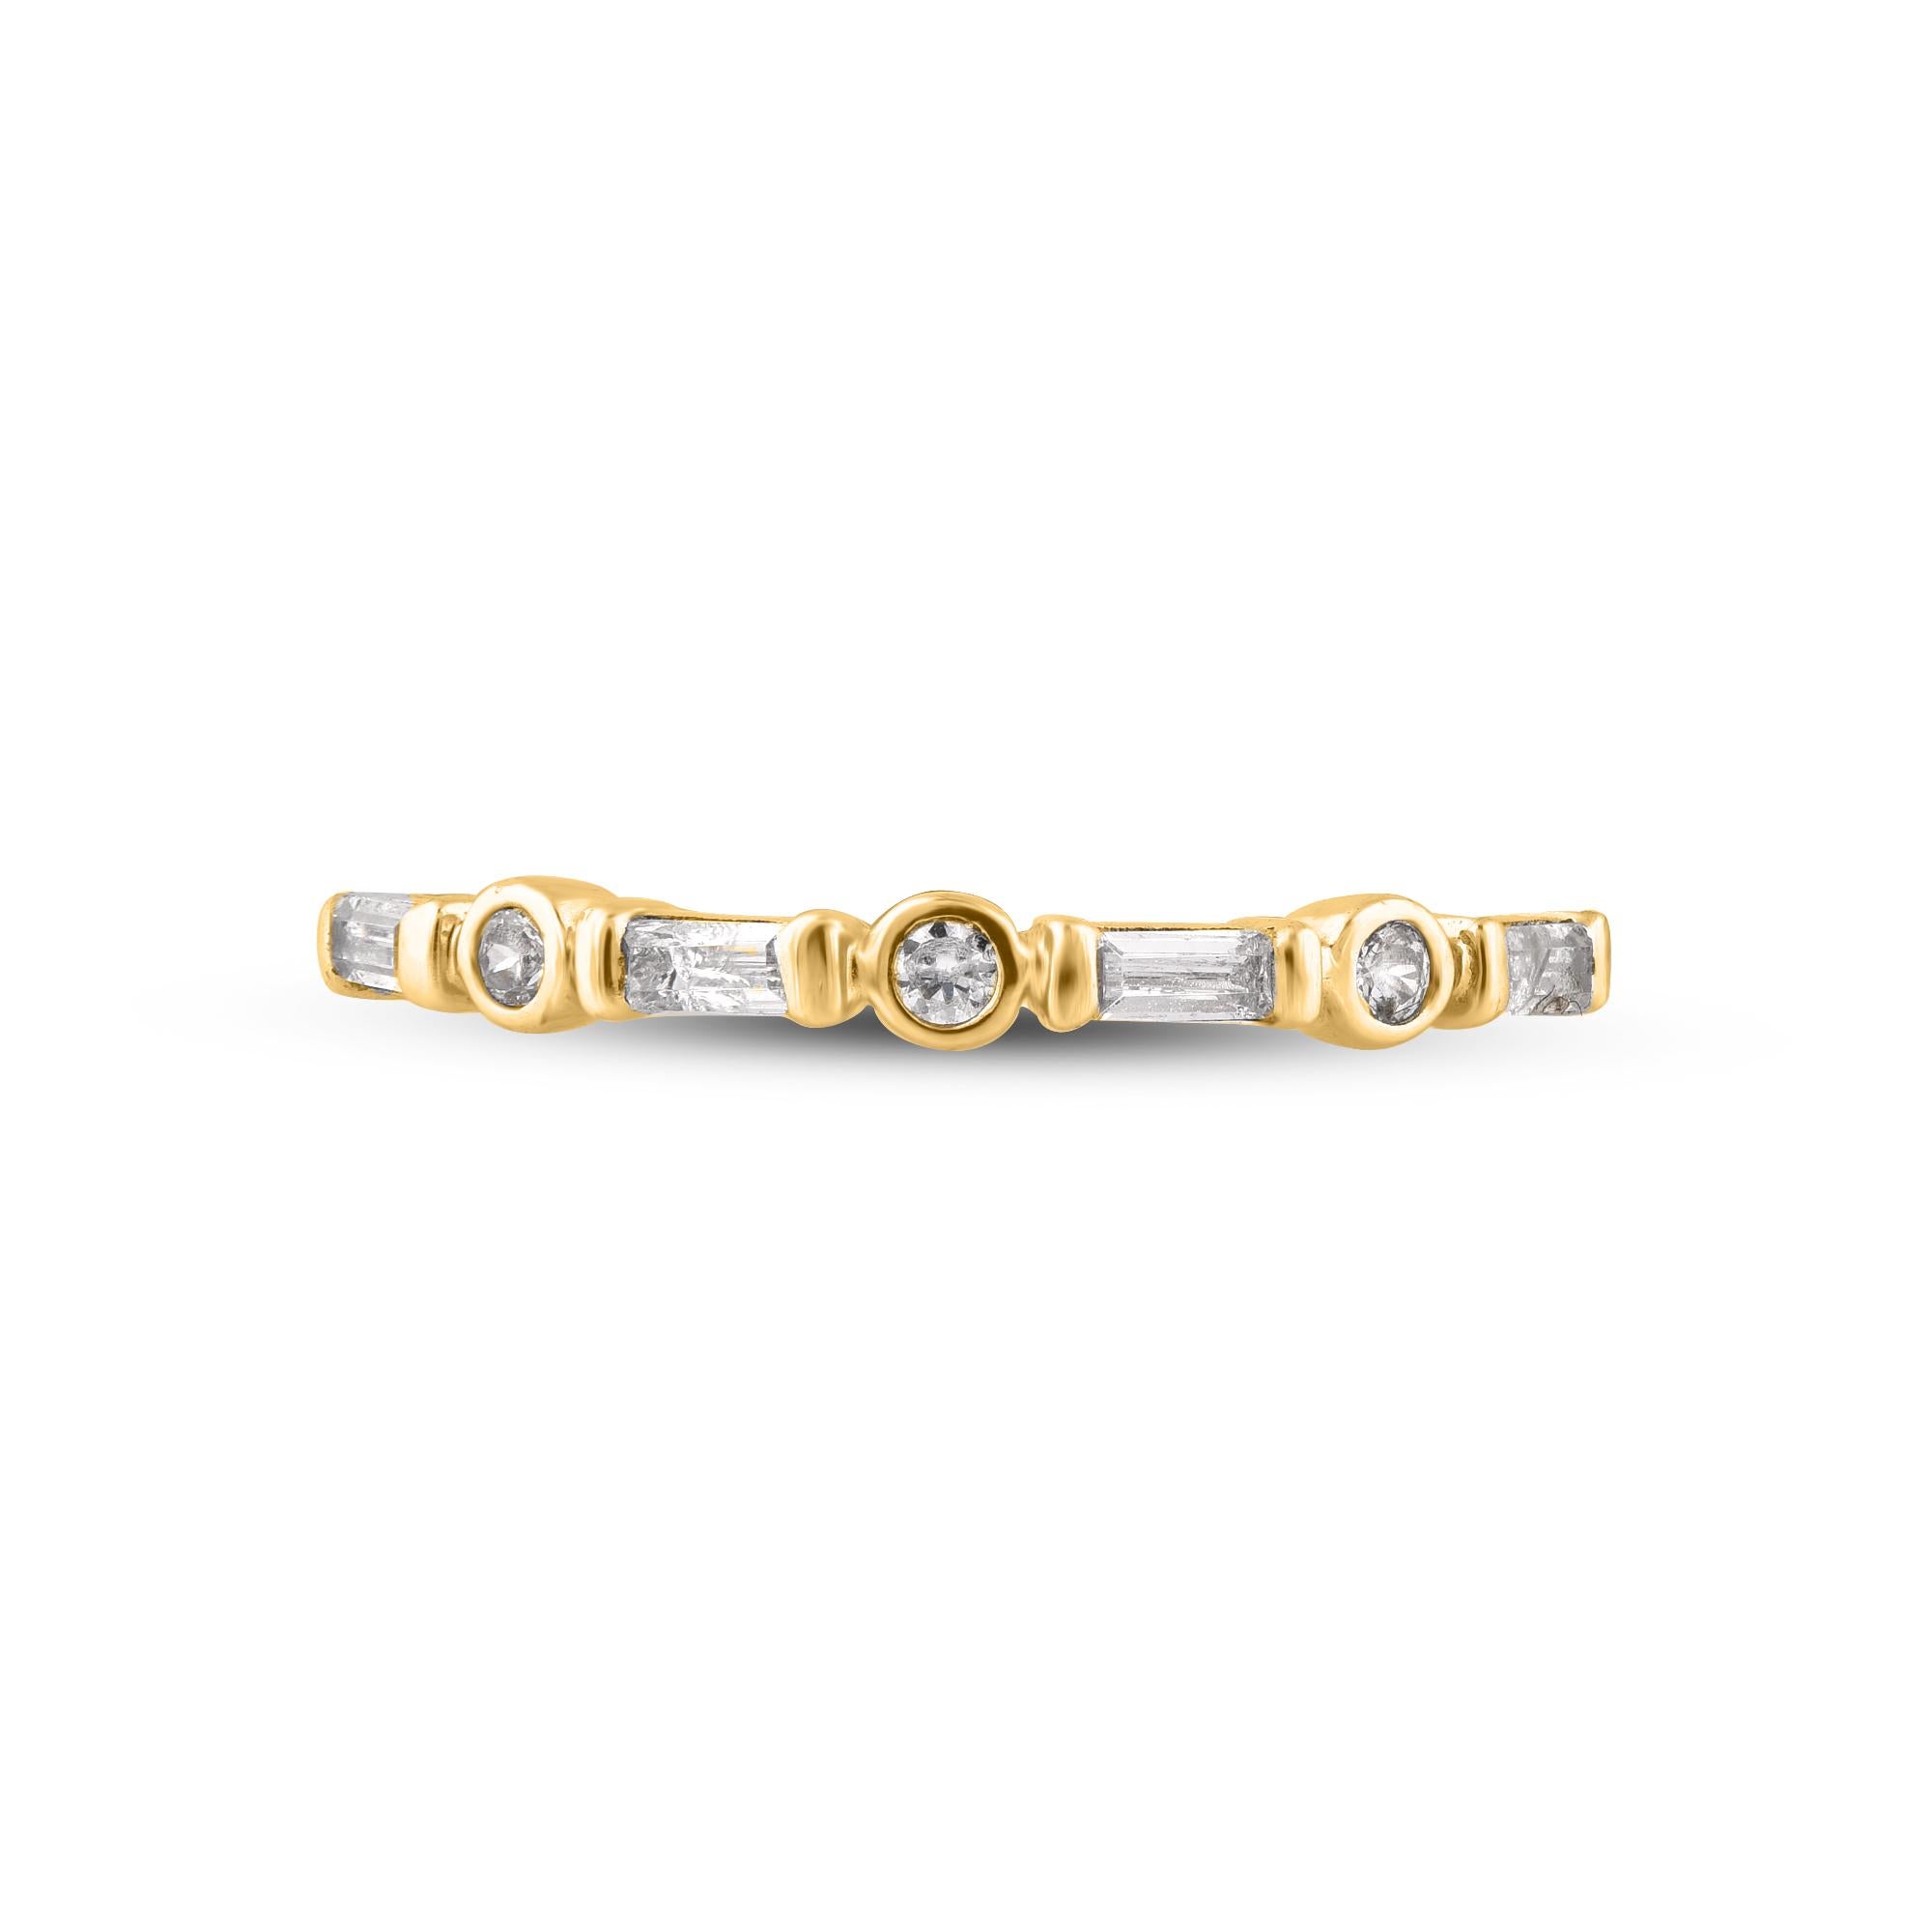 Dazzling and classic, this diamond band ring is anything but ordinary. This band ring features a sparkling 7 brilliant cut & baguette diamonds beautifully in bezel & channel setting. The total diamond weight is 0.20 Carat. The diamonds are graded as